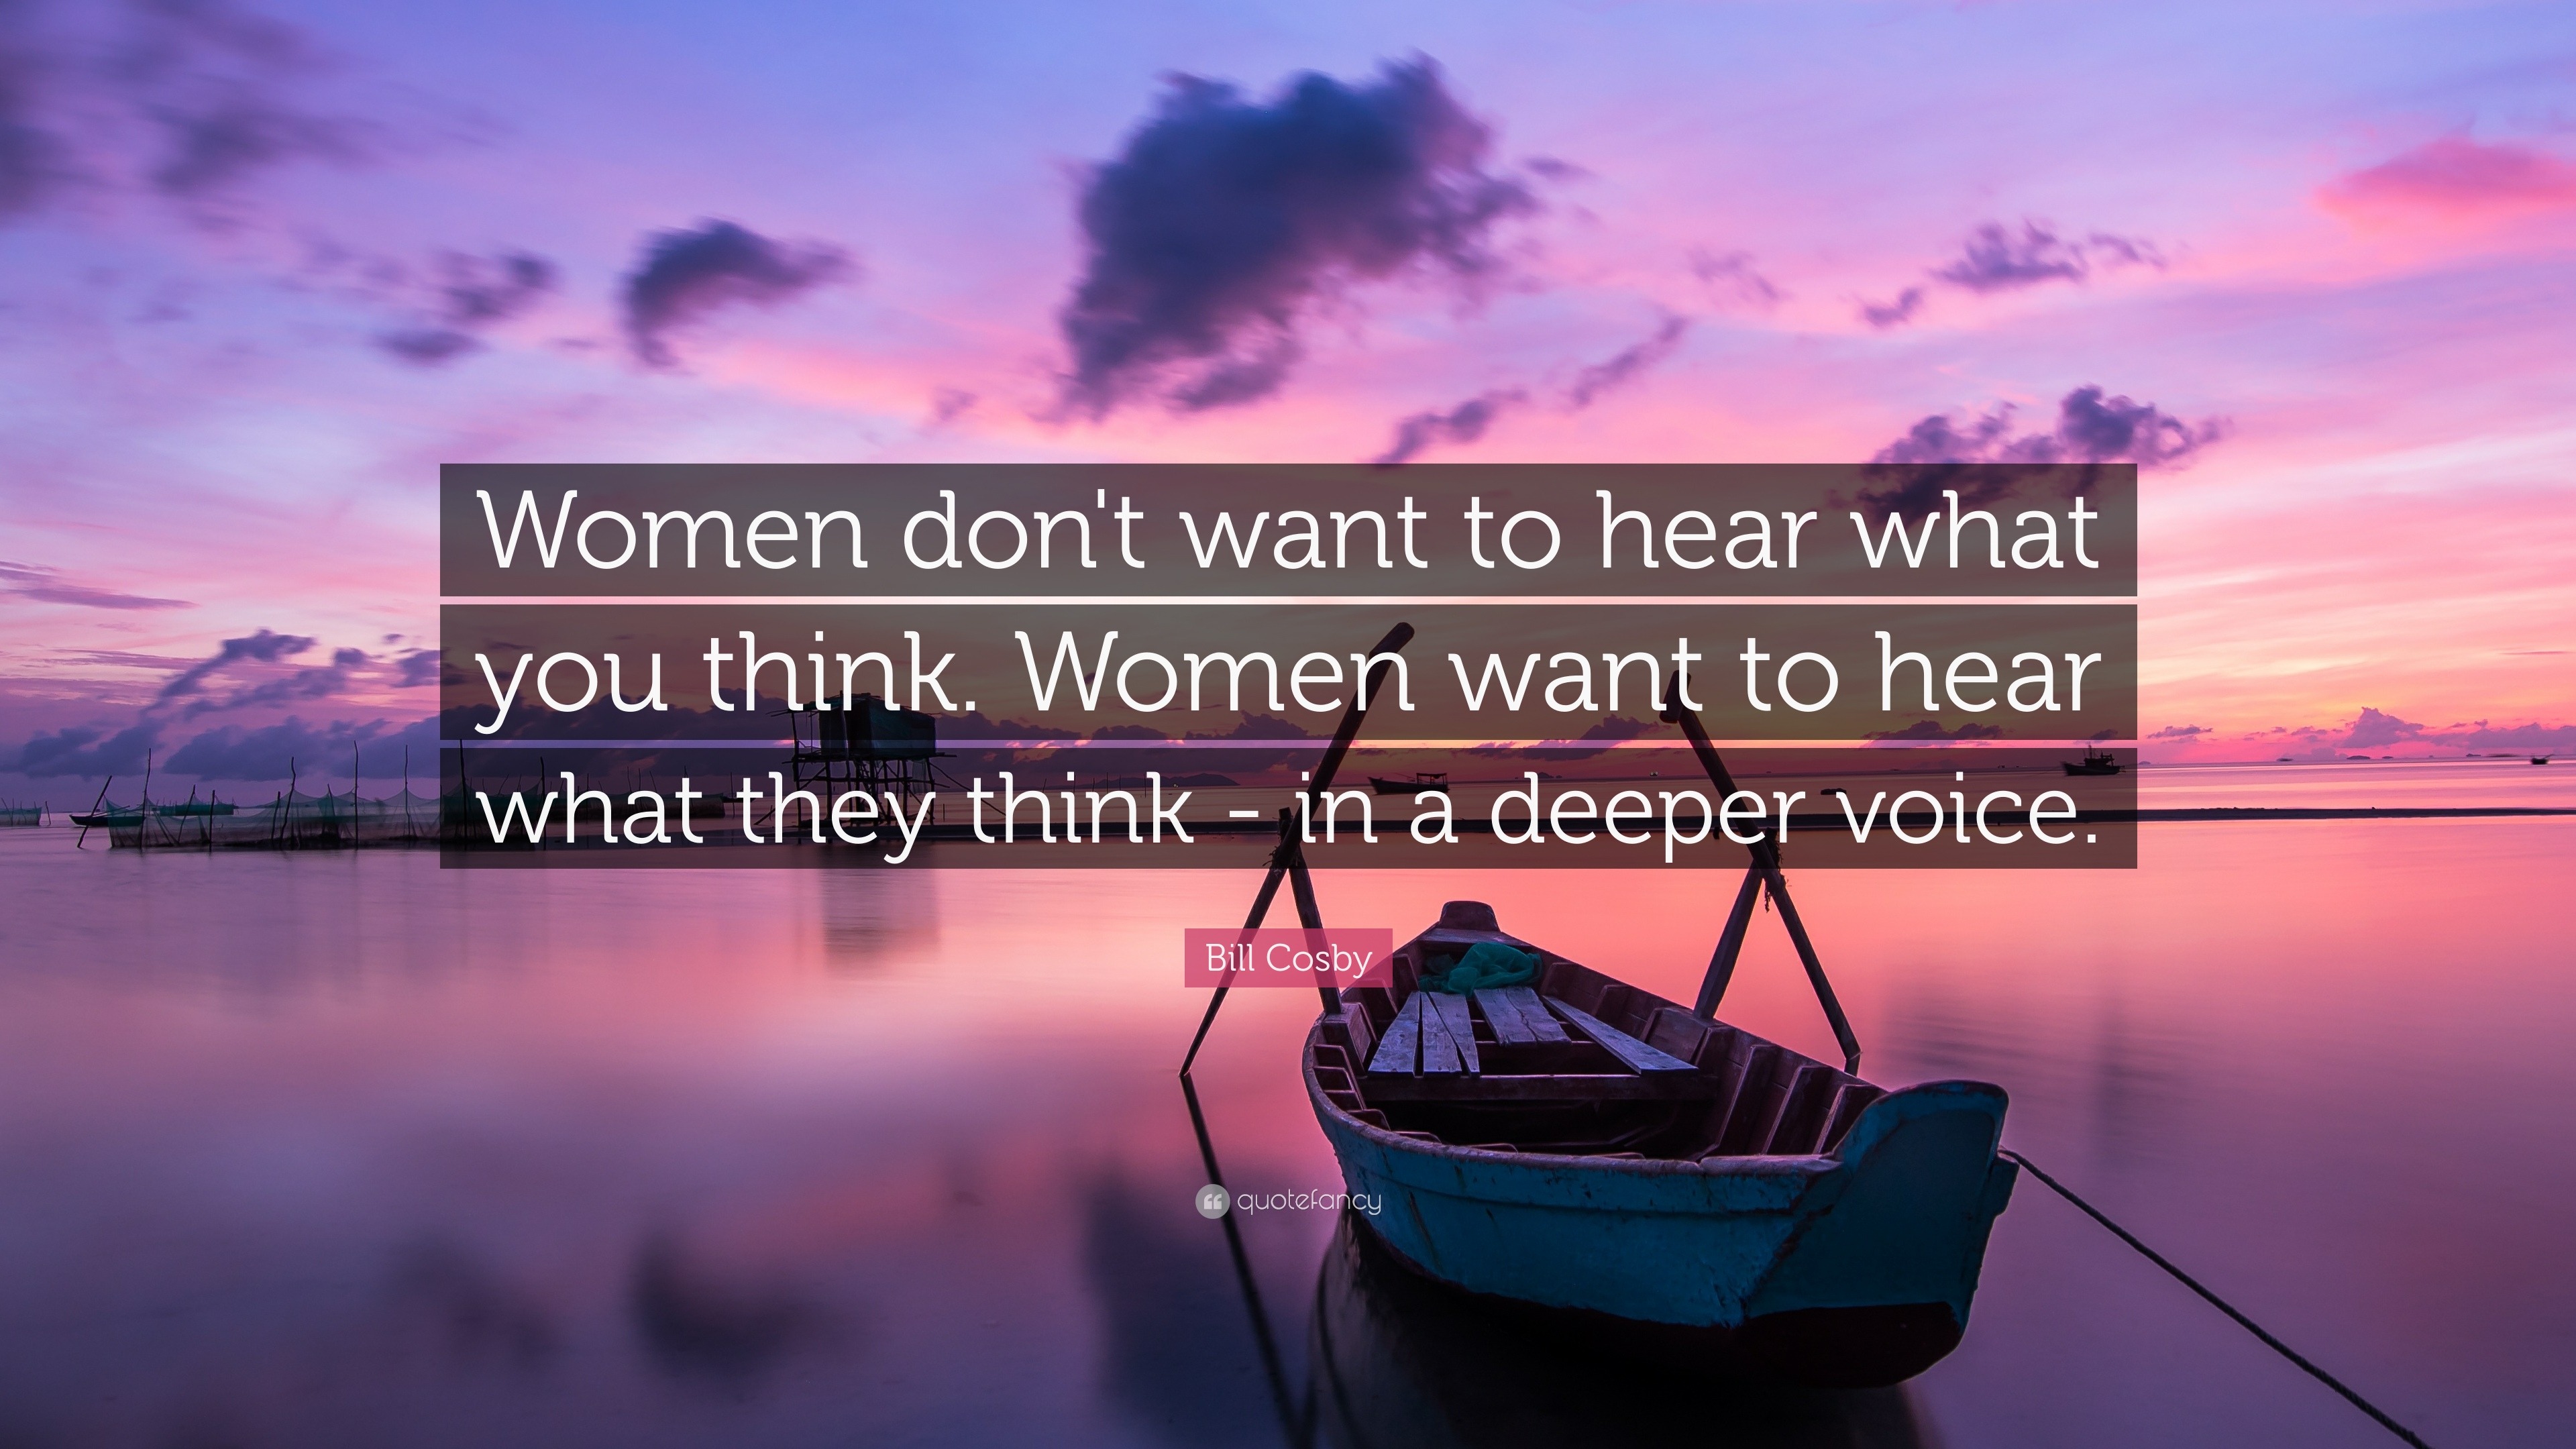 Bill Cosby Quote: “Women don't want to hear what you think. Women want ...